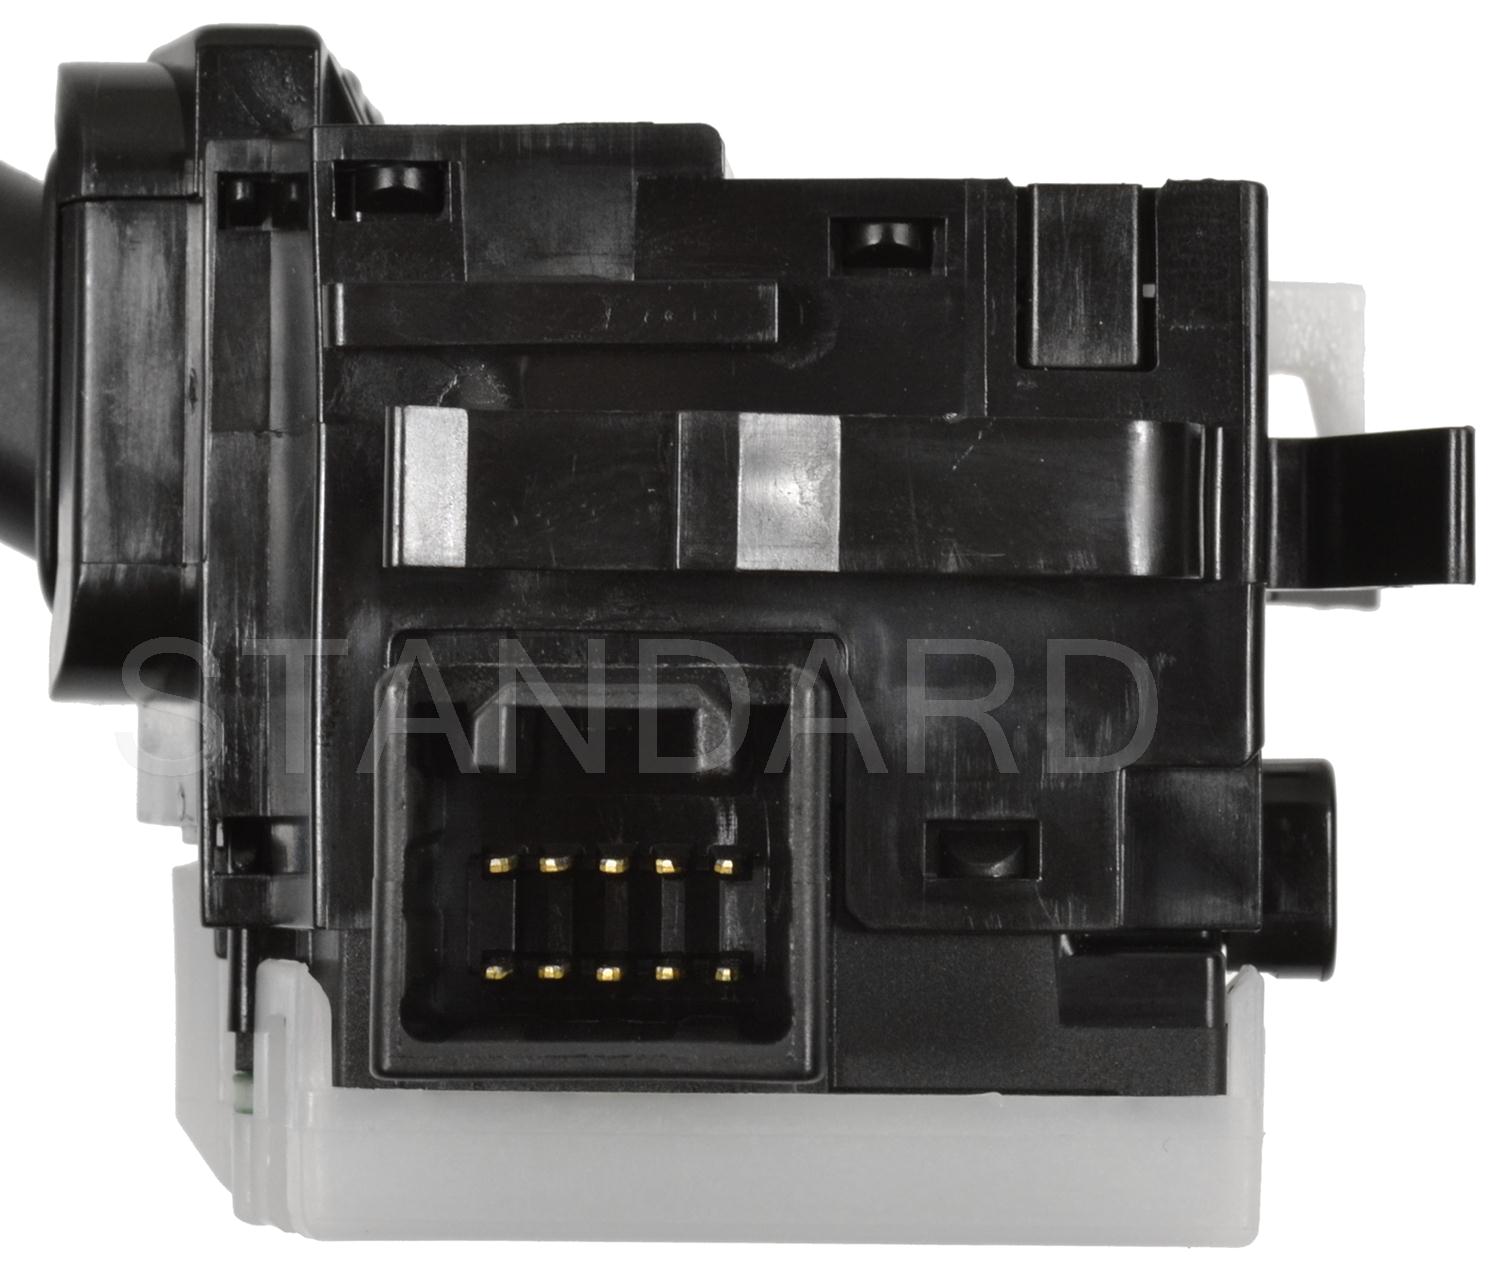 Show details for Standard Motor Products CBS1979 Standard Motor Products Cbs-1979 Combination Switch